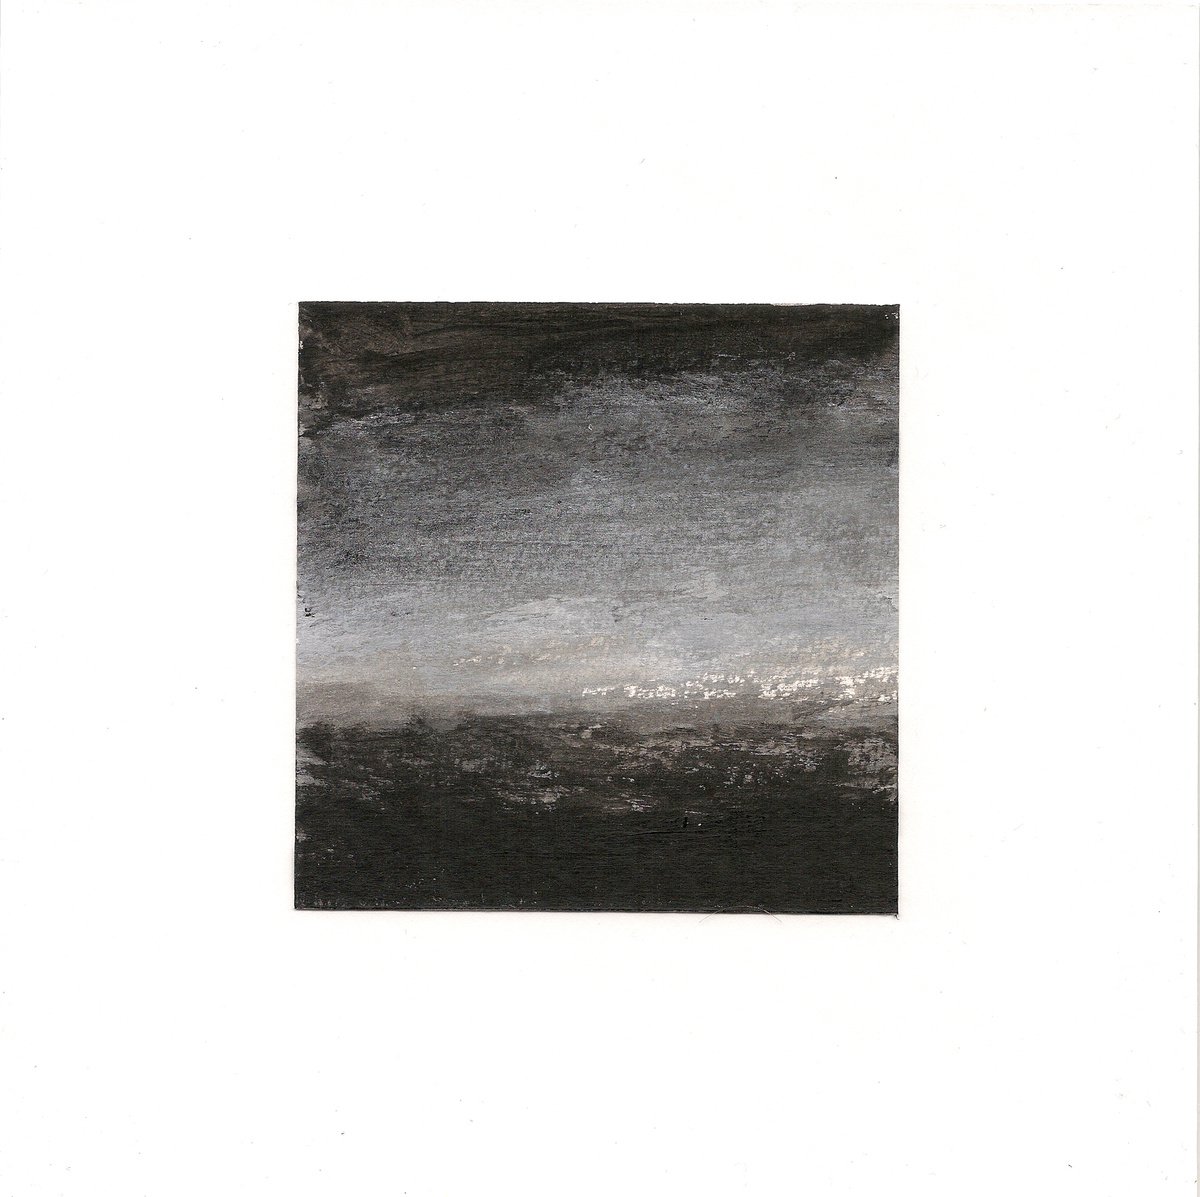 Horizon n?2 - Atmospheric landscape in grey, black and white - Miniature - Ready to frame by Fabienne Monestier